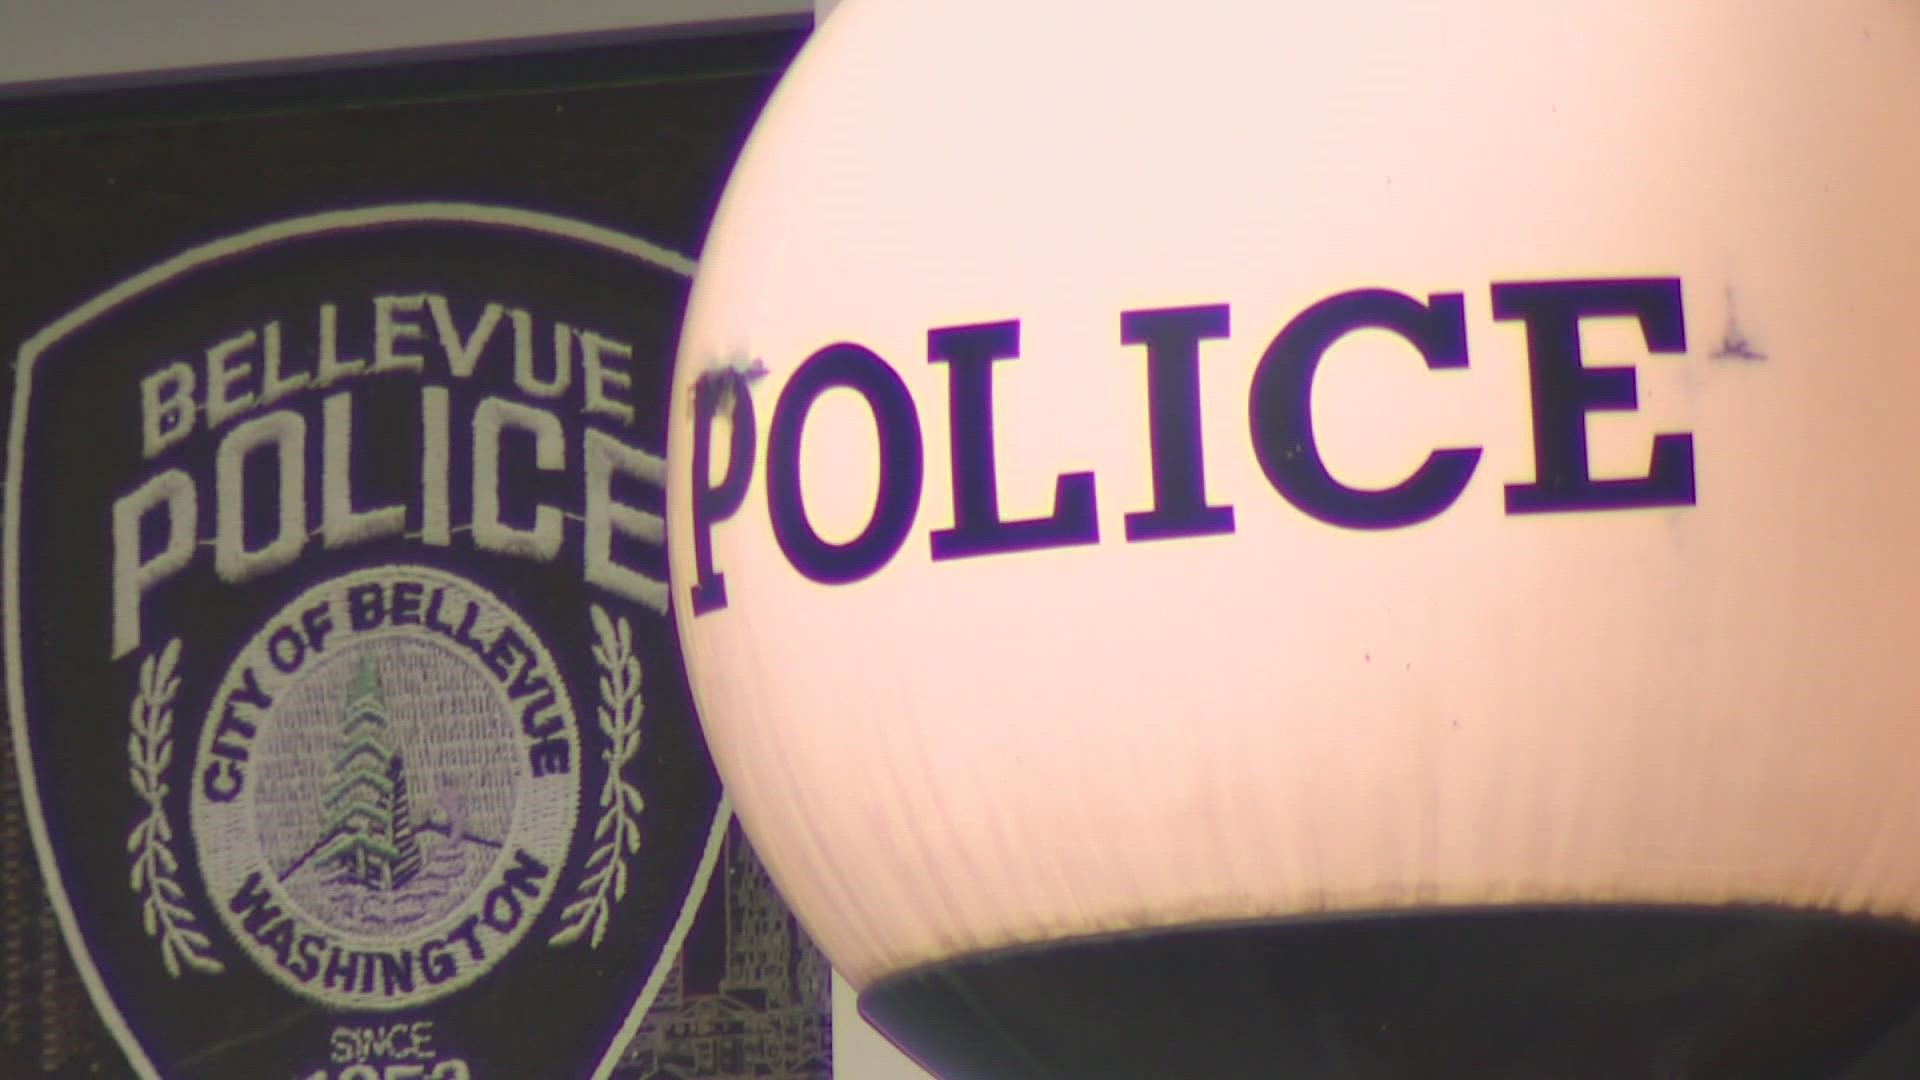 Local businesses say they are dealing with break-ins and thefts. Bellevue Police now aim to reduce crime with a new initiative.